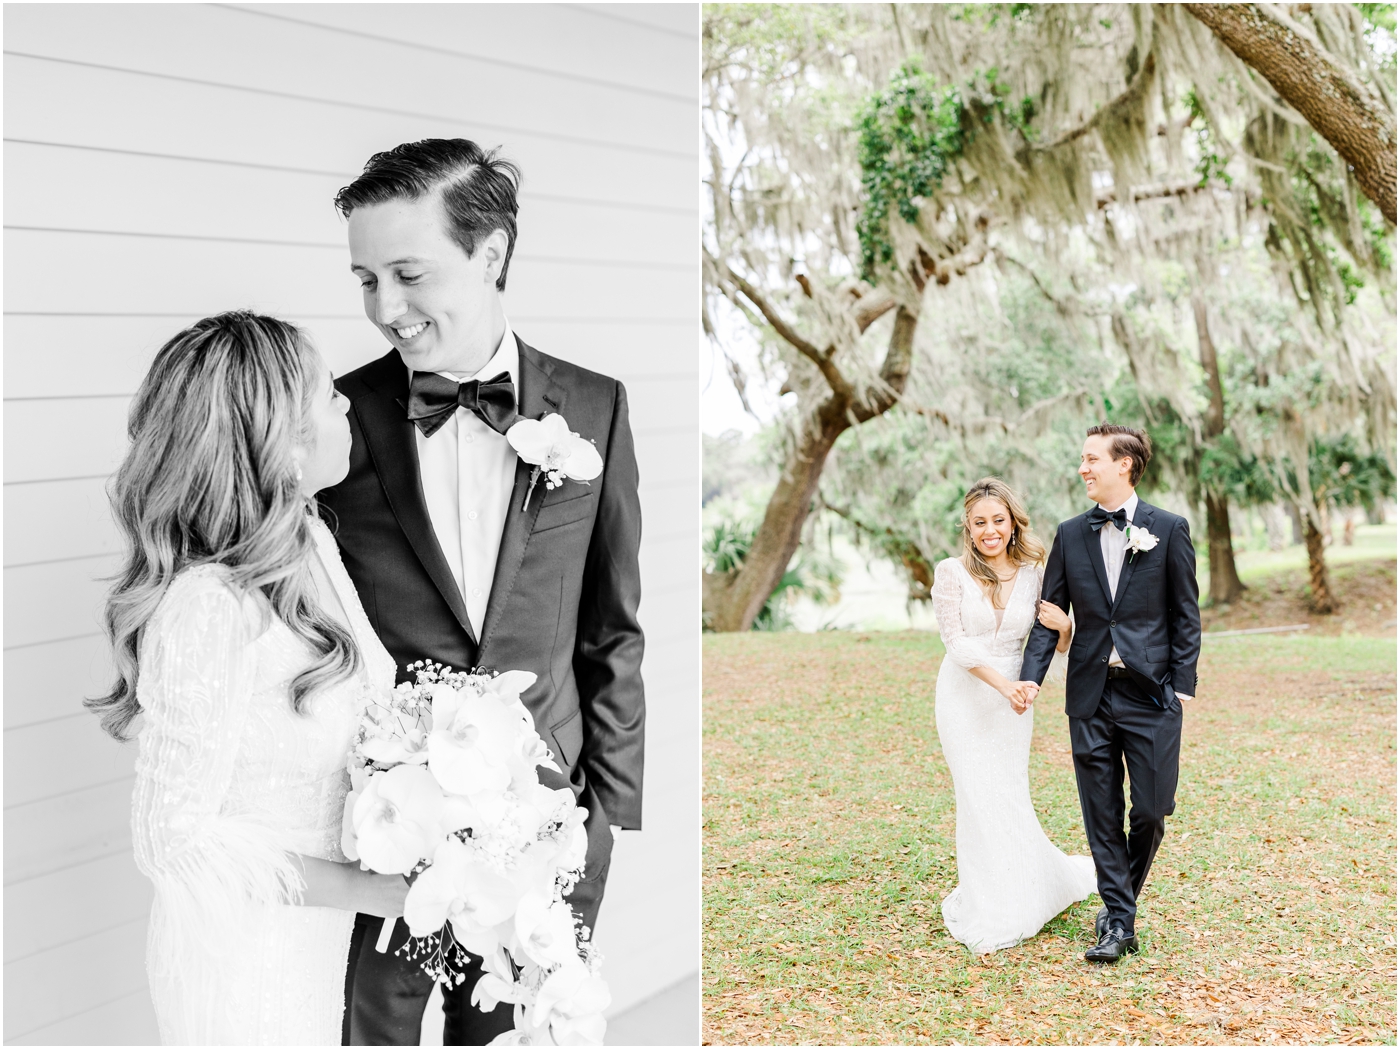 Bride & Groom with Spanish moss at the Beaufort Inn Beaufort, SC